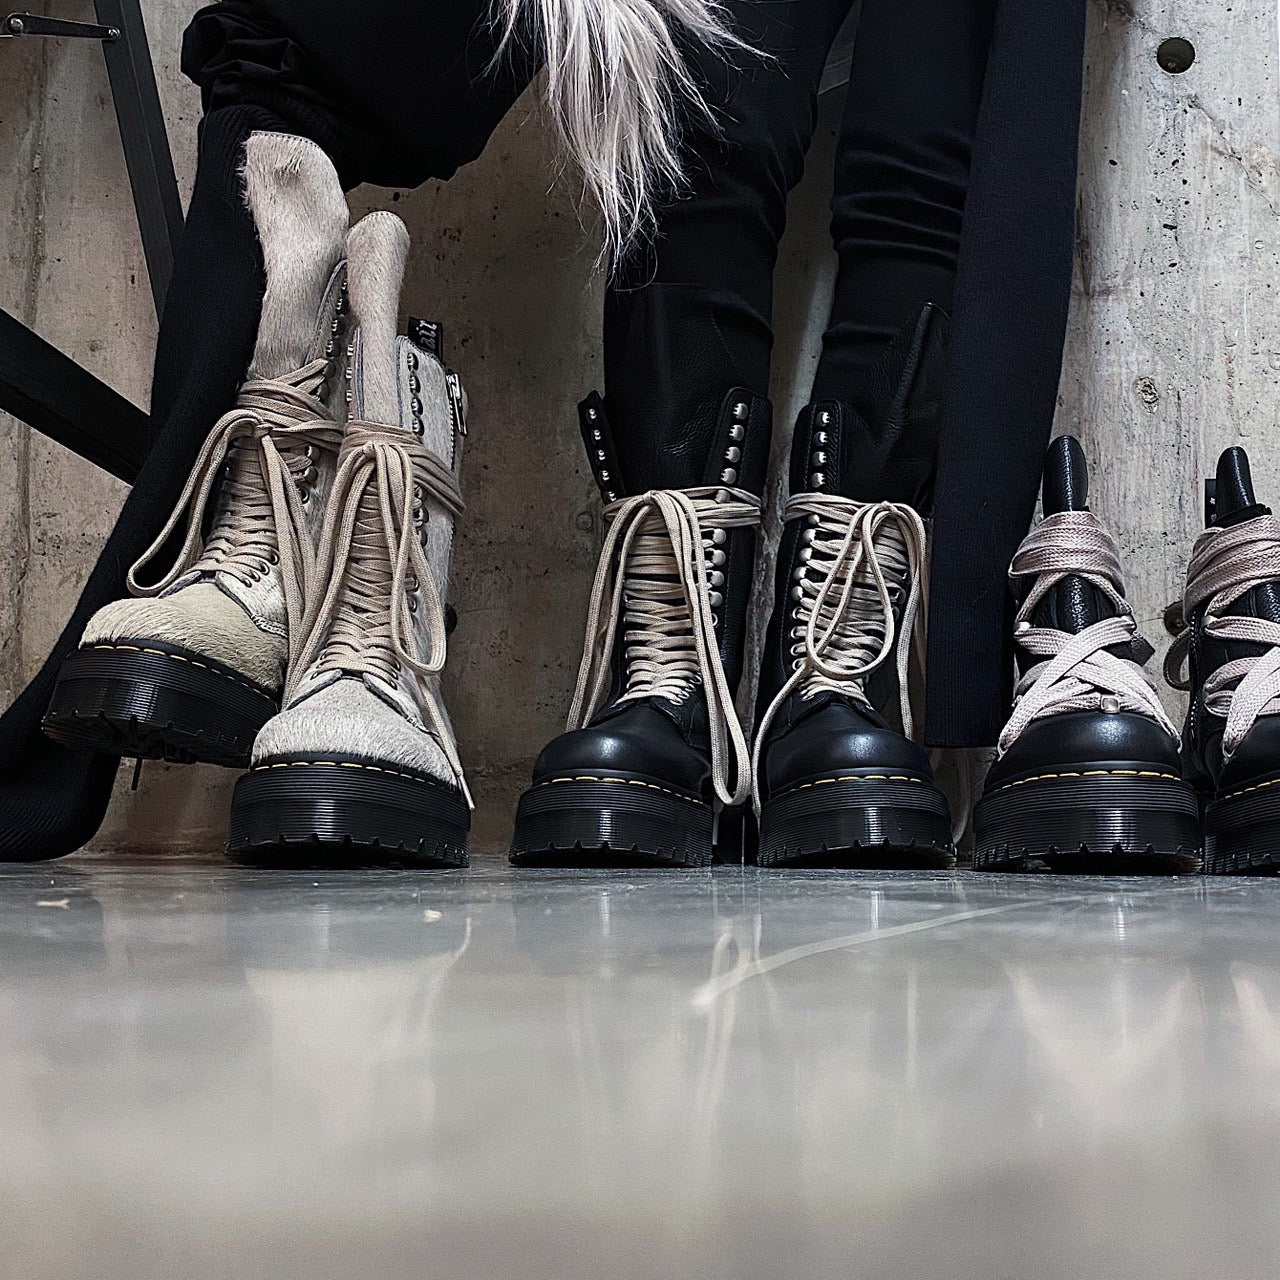 Rick Owens x Dr. Martens】 The second collaboration boots